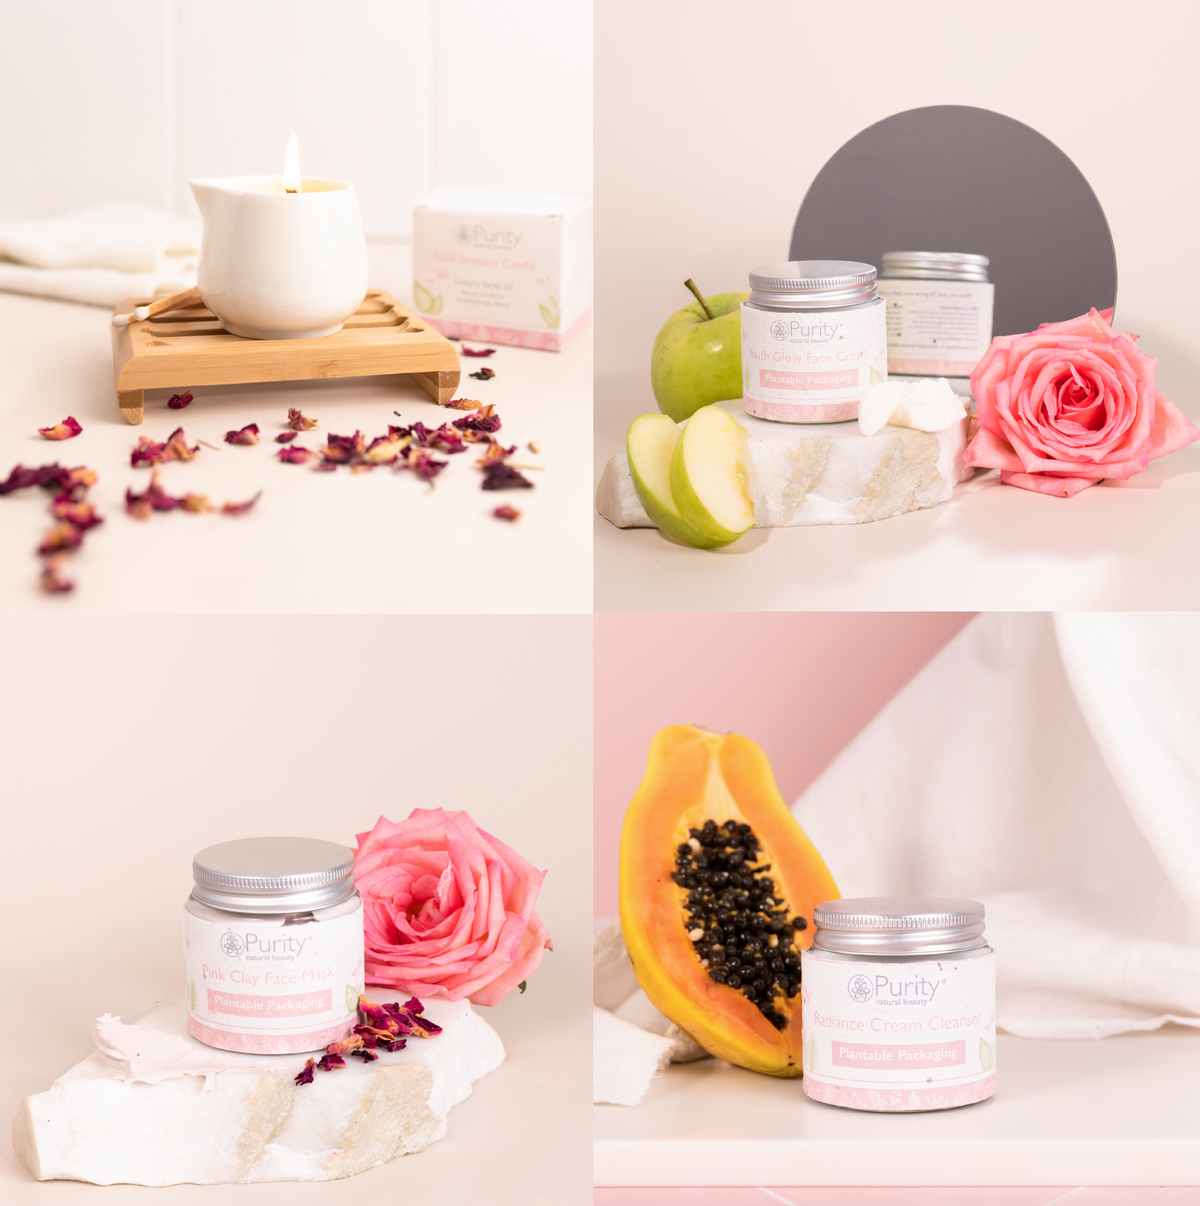 Purity Pamper Pack